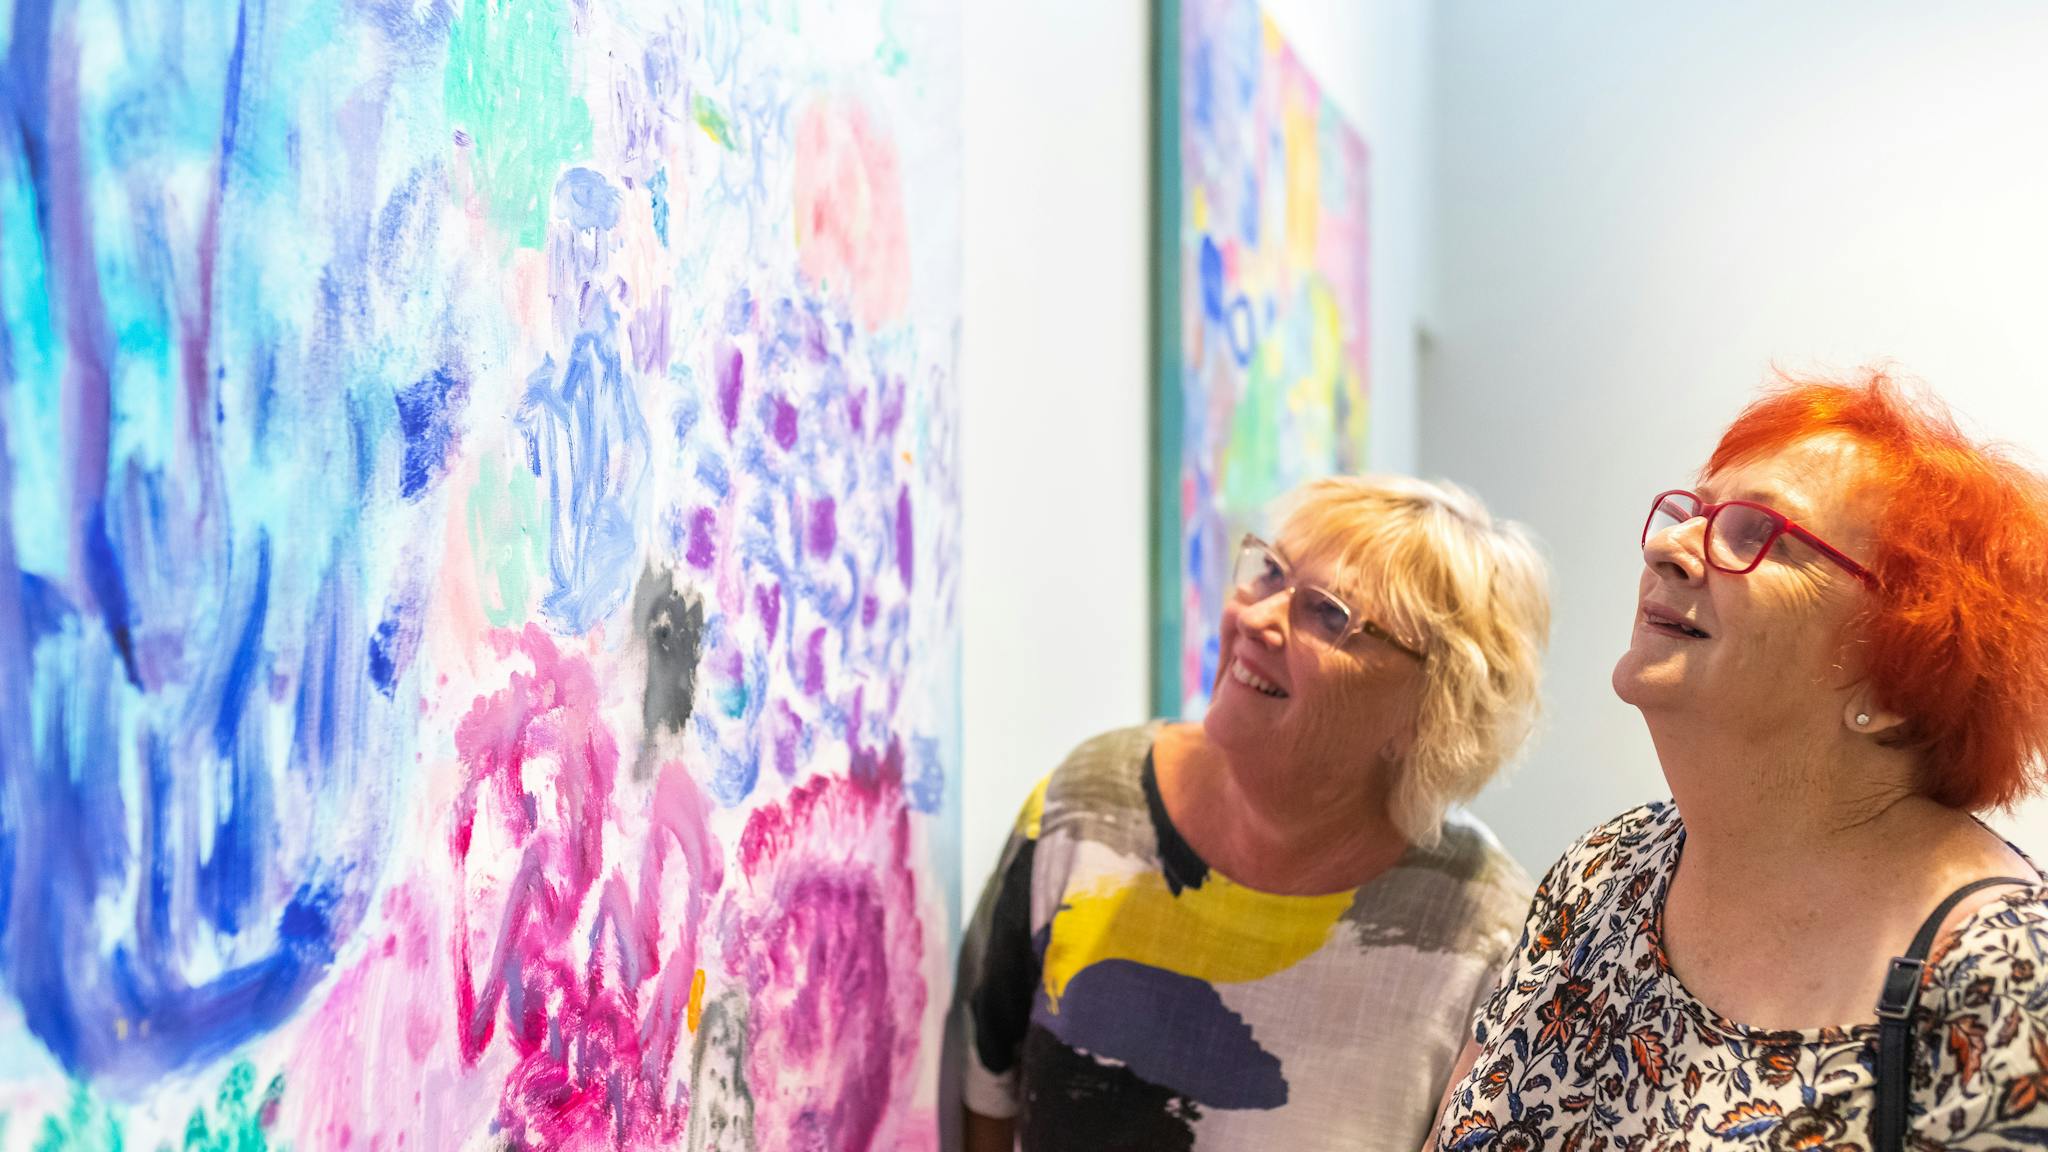 Two women looking closely at colourful artwork